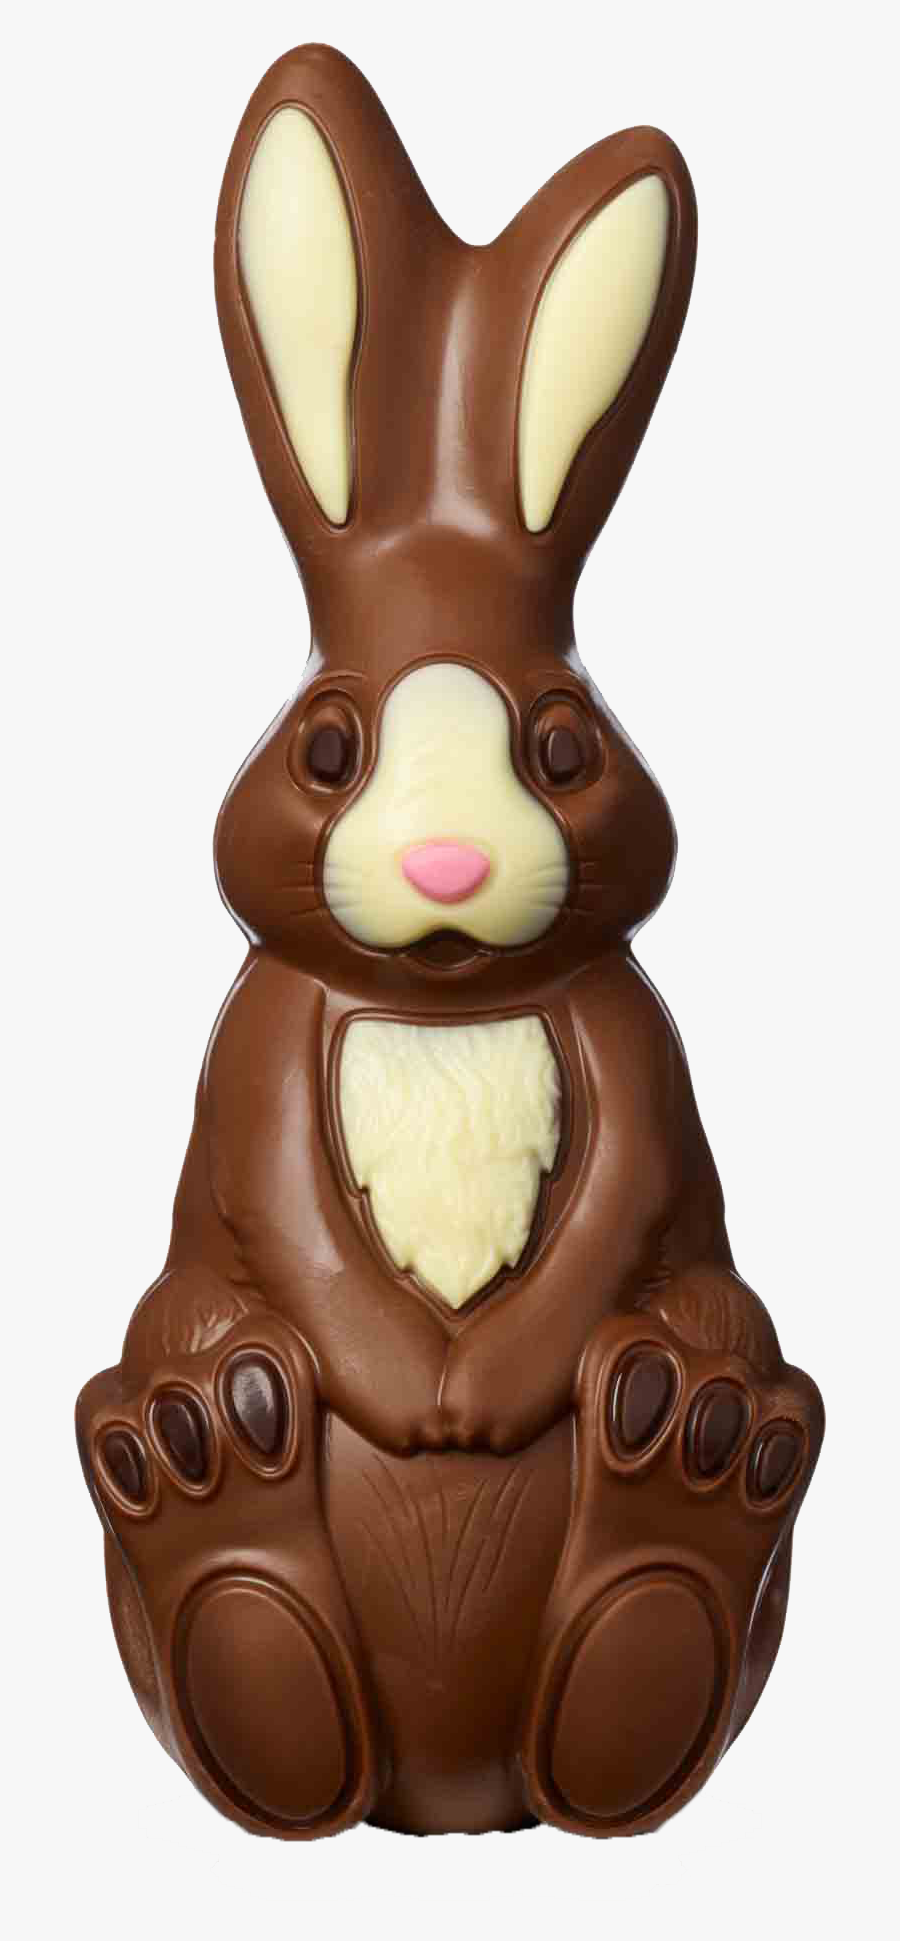 Chocolate Easter Bunnies - Chocolate Bunny Png, Transparent Clipart